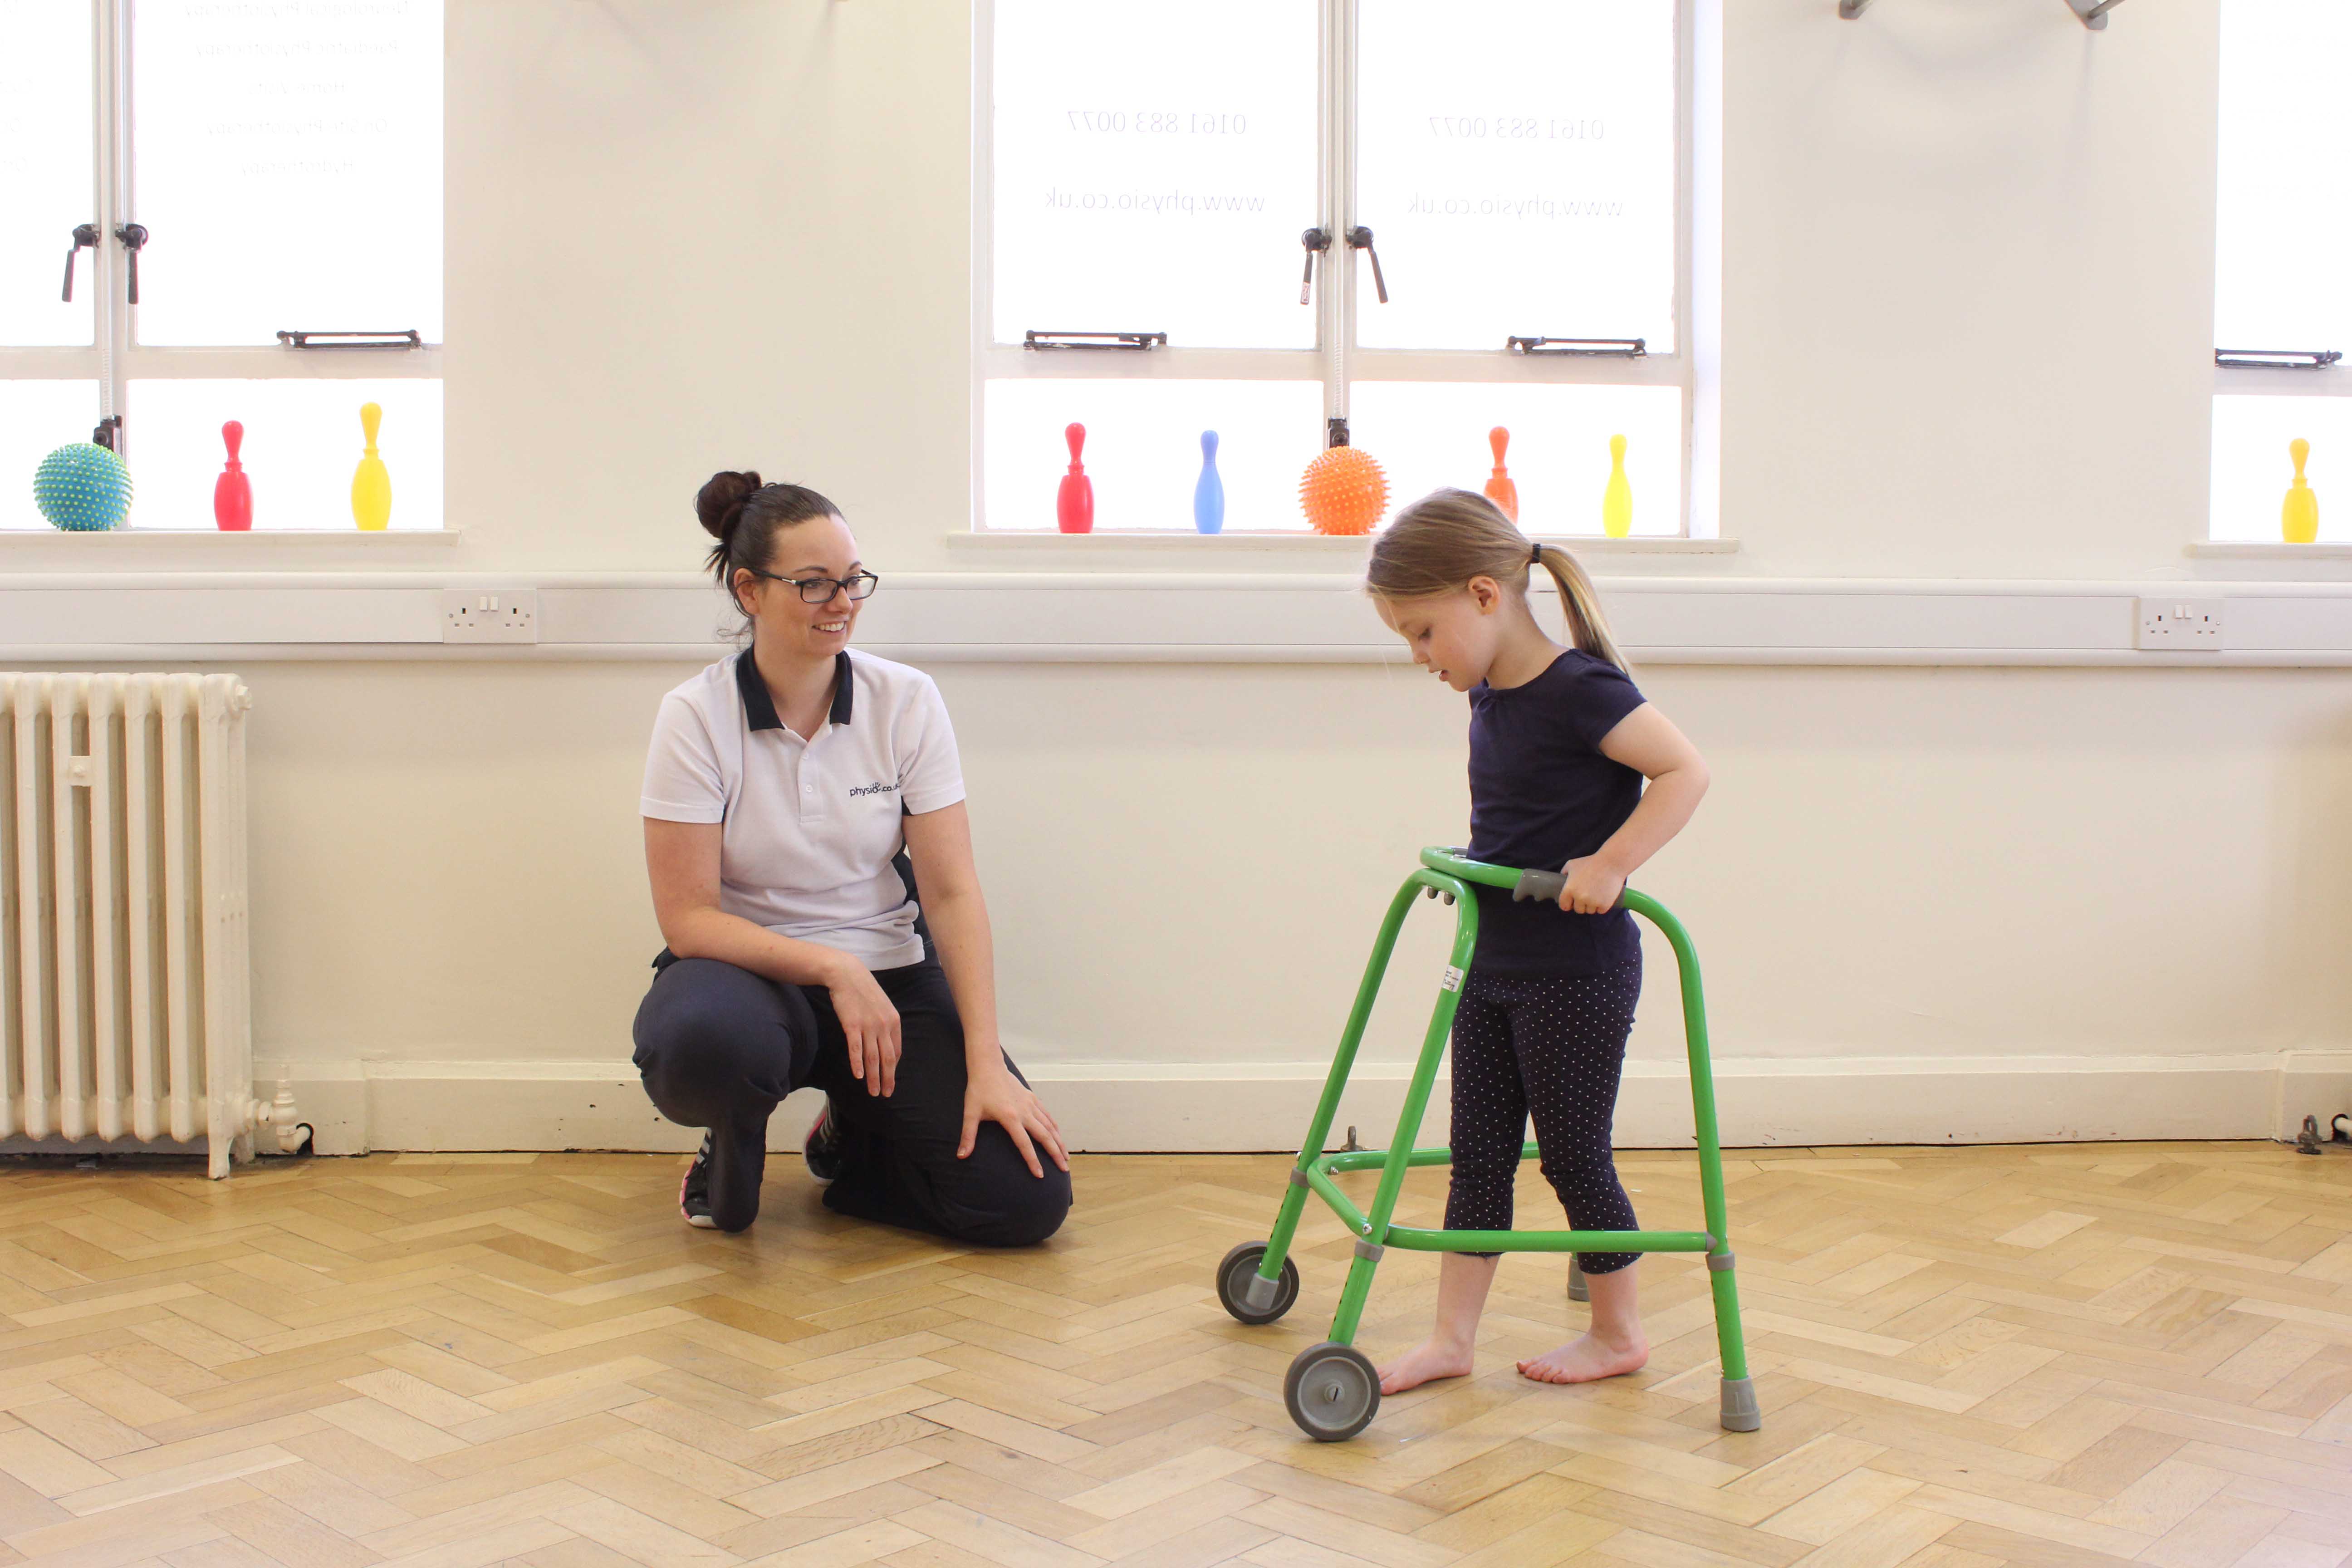 Gait re-education exercises supervised by experienced physiotherapist